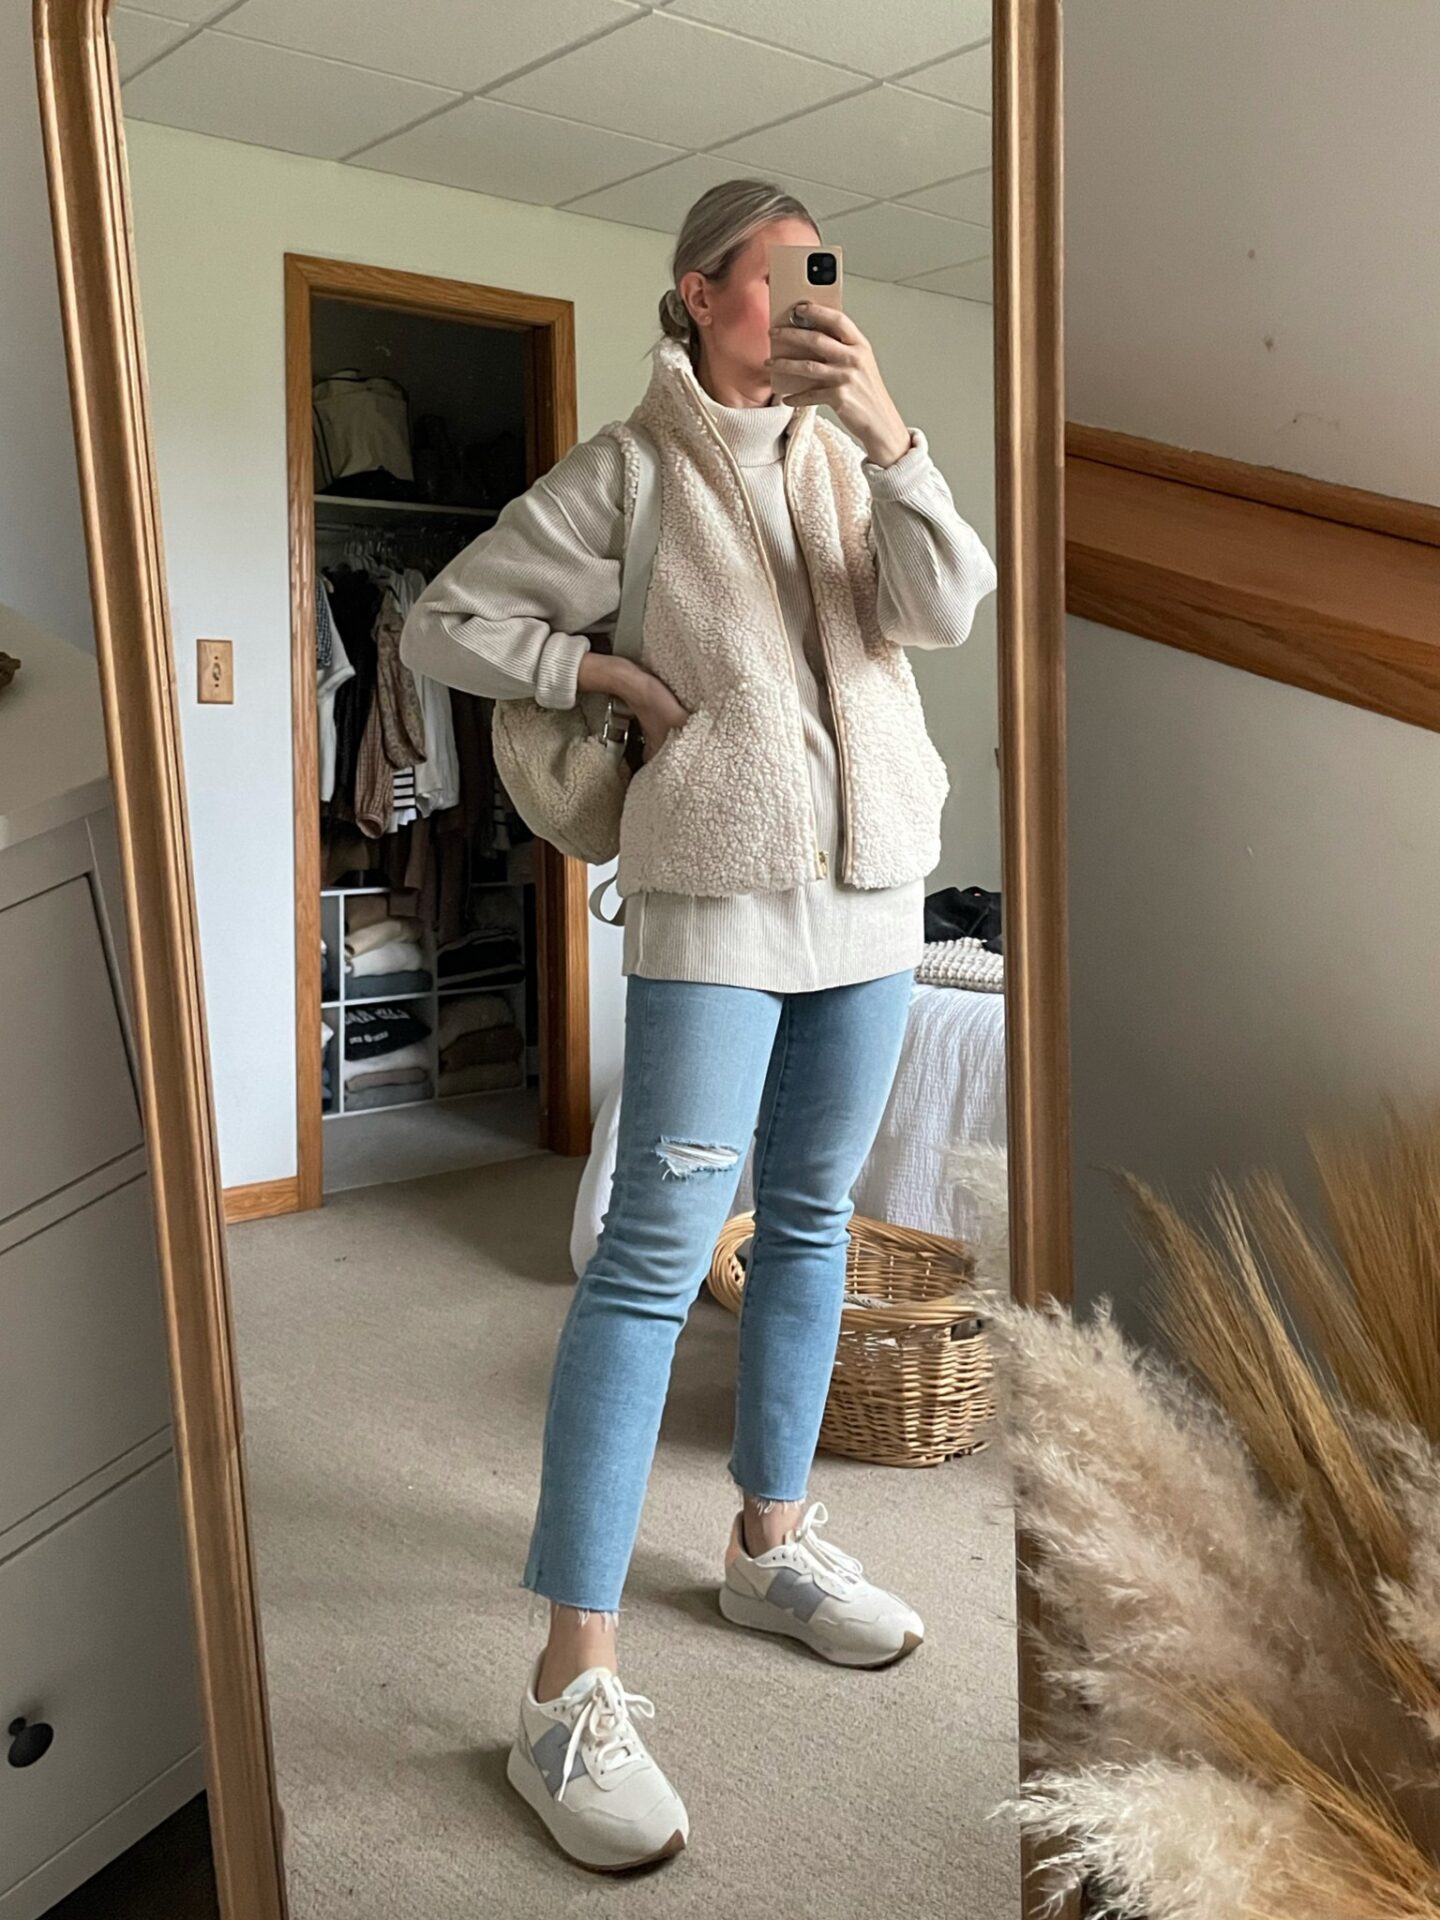 Karin Emily wears a Free People Tunic Sweater, Sherpa Vest, Light Wash Jeans, and New Balance Sneakers